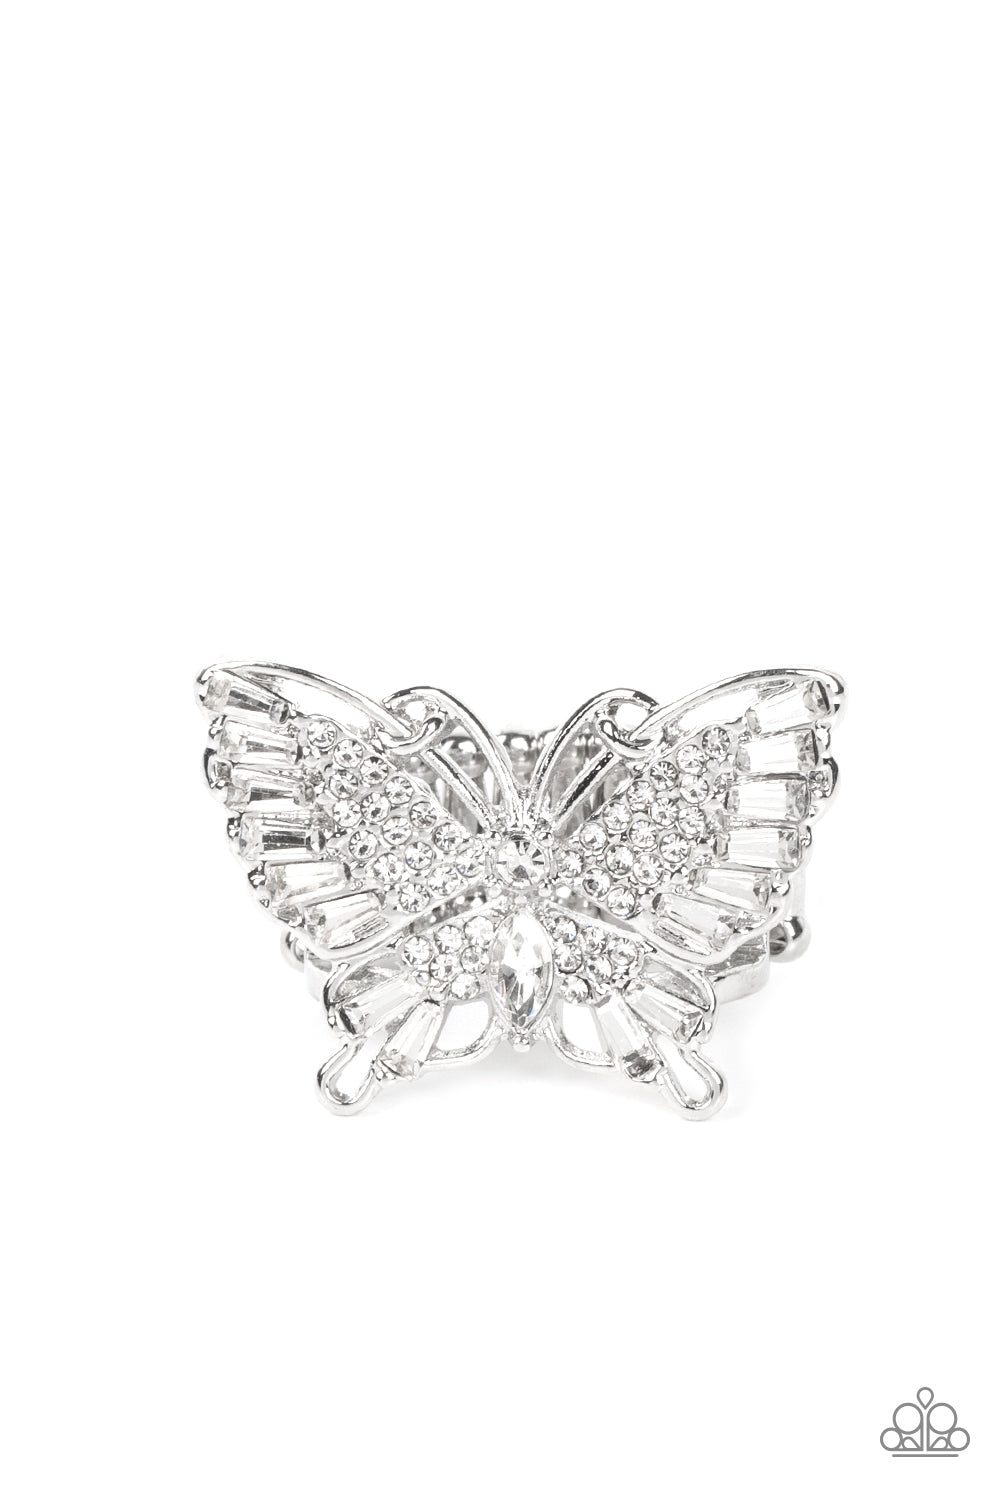 Fearless Flutter White Ring - Paparazzi Accessories  Sparkling with round, teardrop, and emerald cut white rhinestones, a silver butterfly fearlessly flutters atop the finger for a statement-making finish. Features a stretchy band for a flexible fit.  Sold as one individual ring.